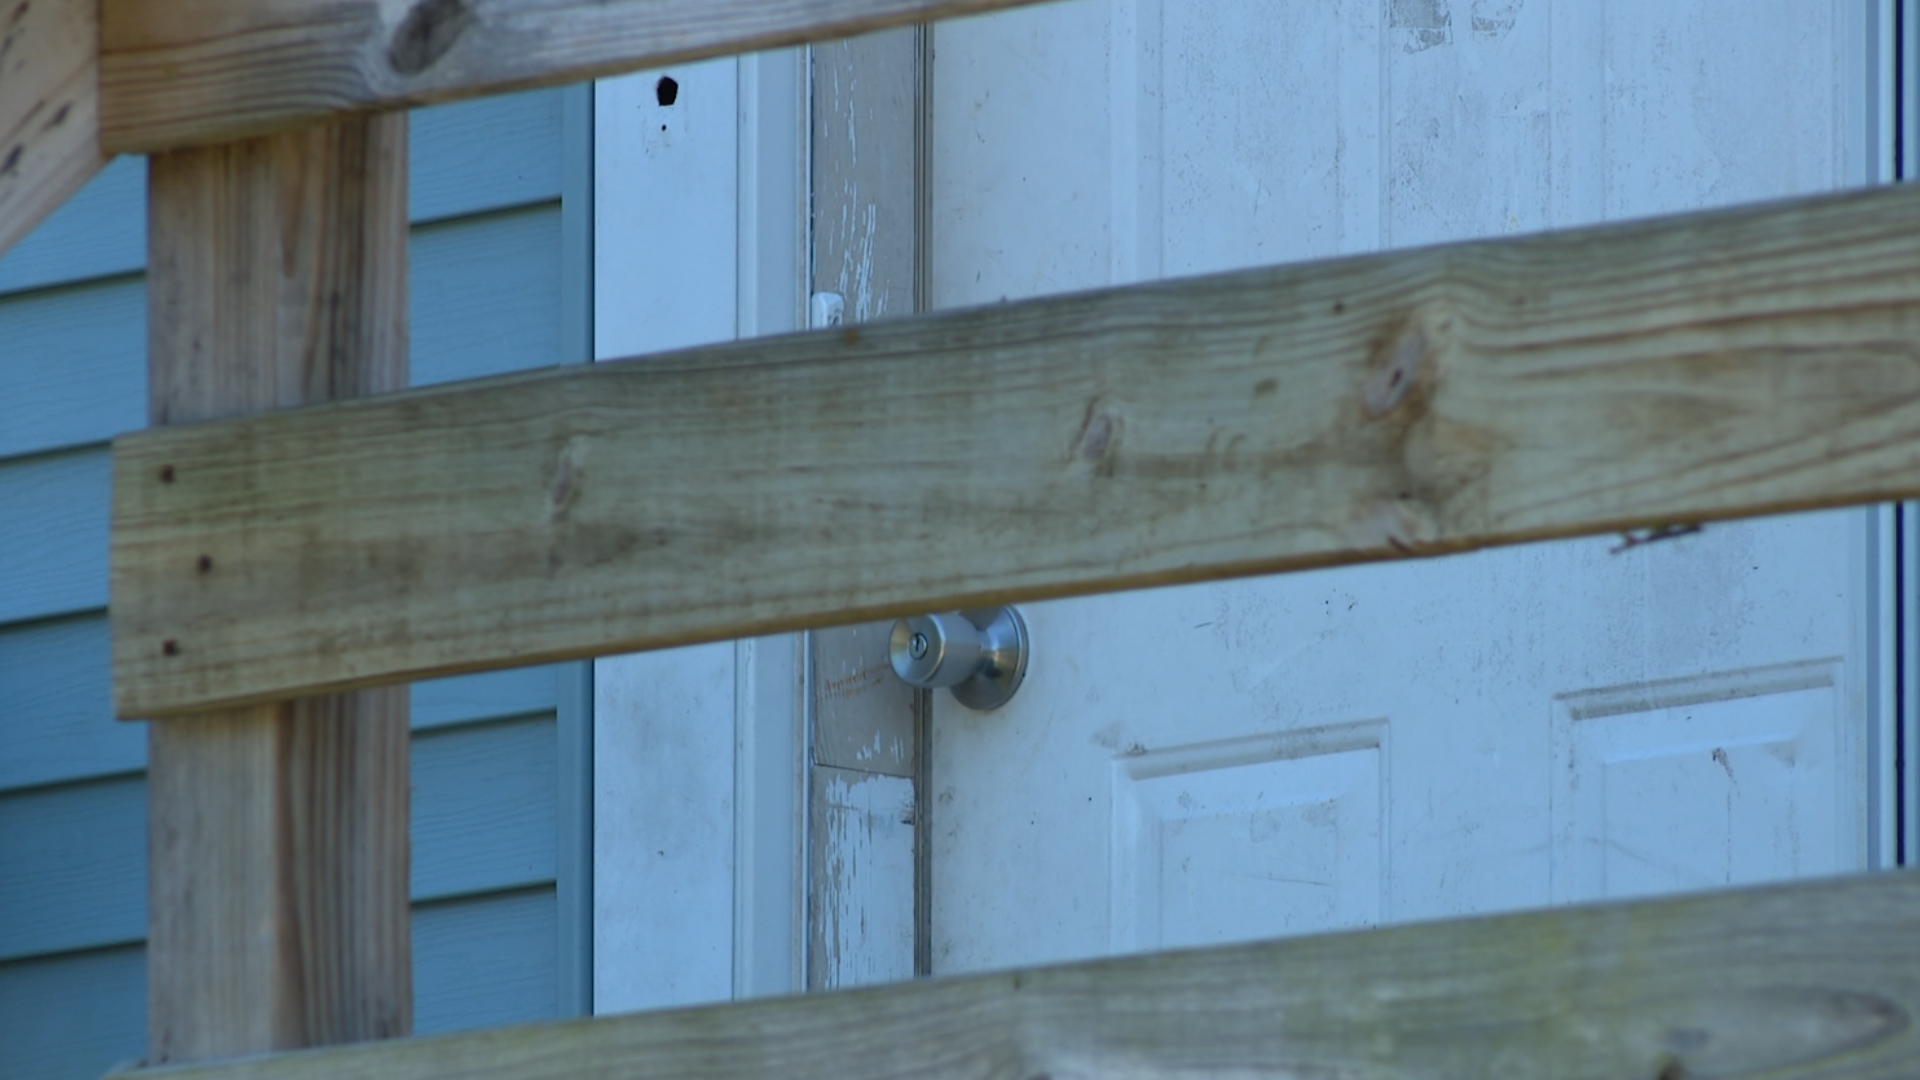 Neighbors in Anderson say a woman was going door to door in the middle of the night asking for help after she shot and killed a man who broke into her home.